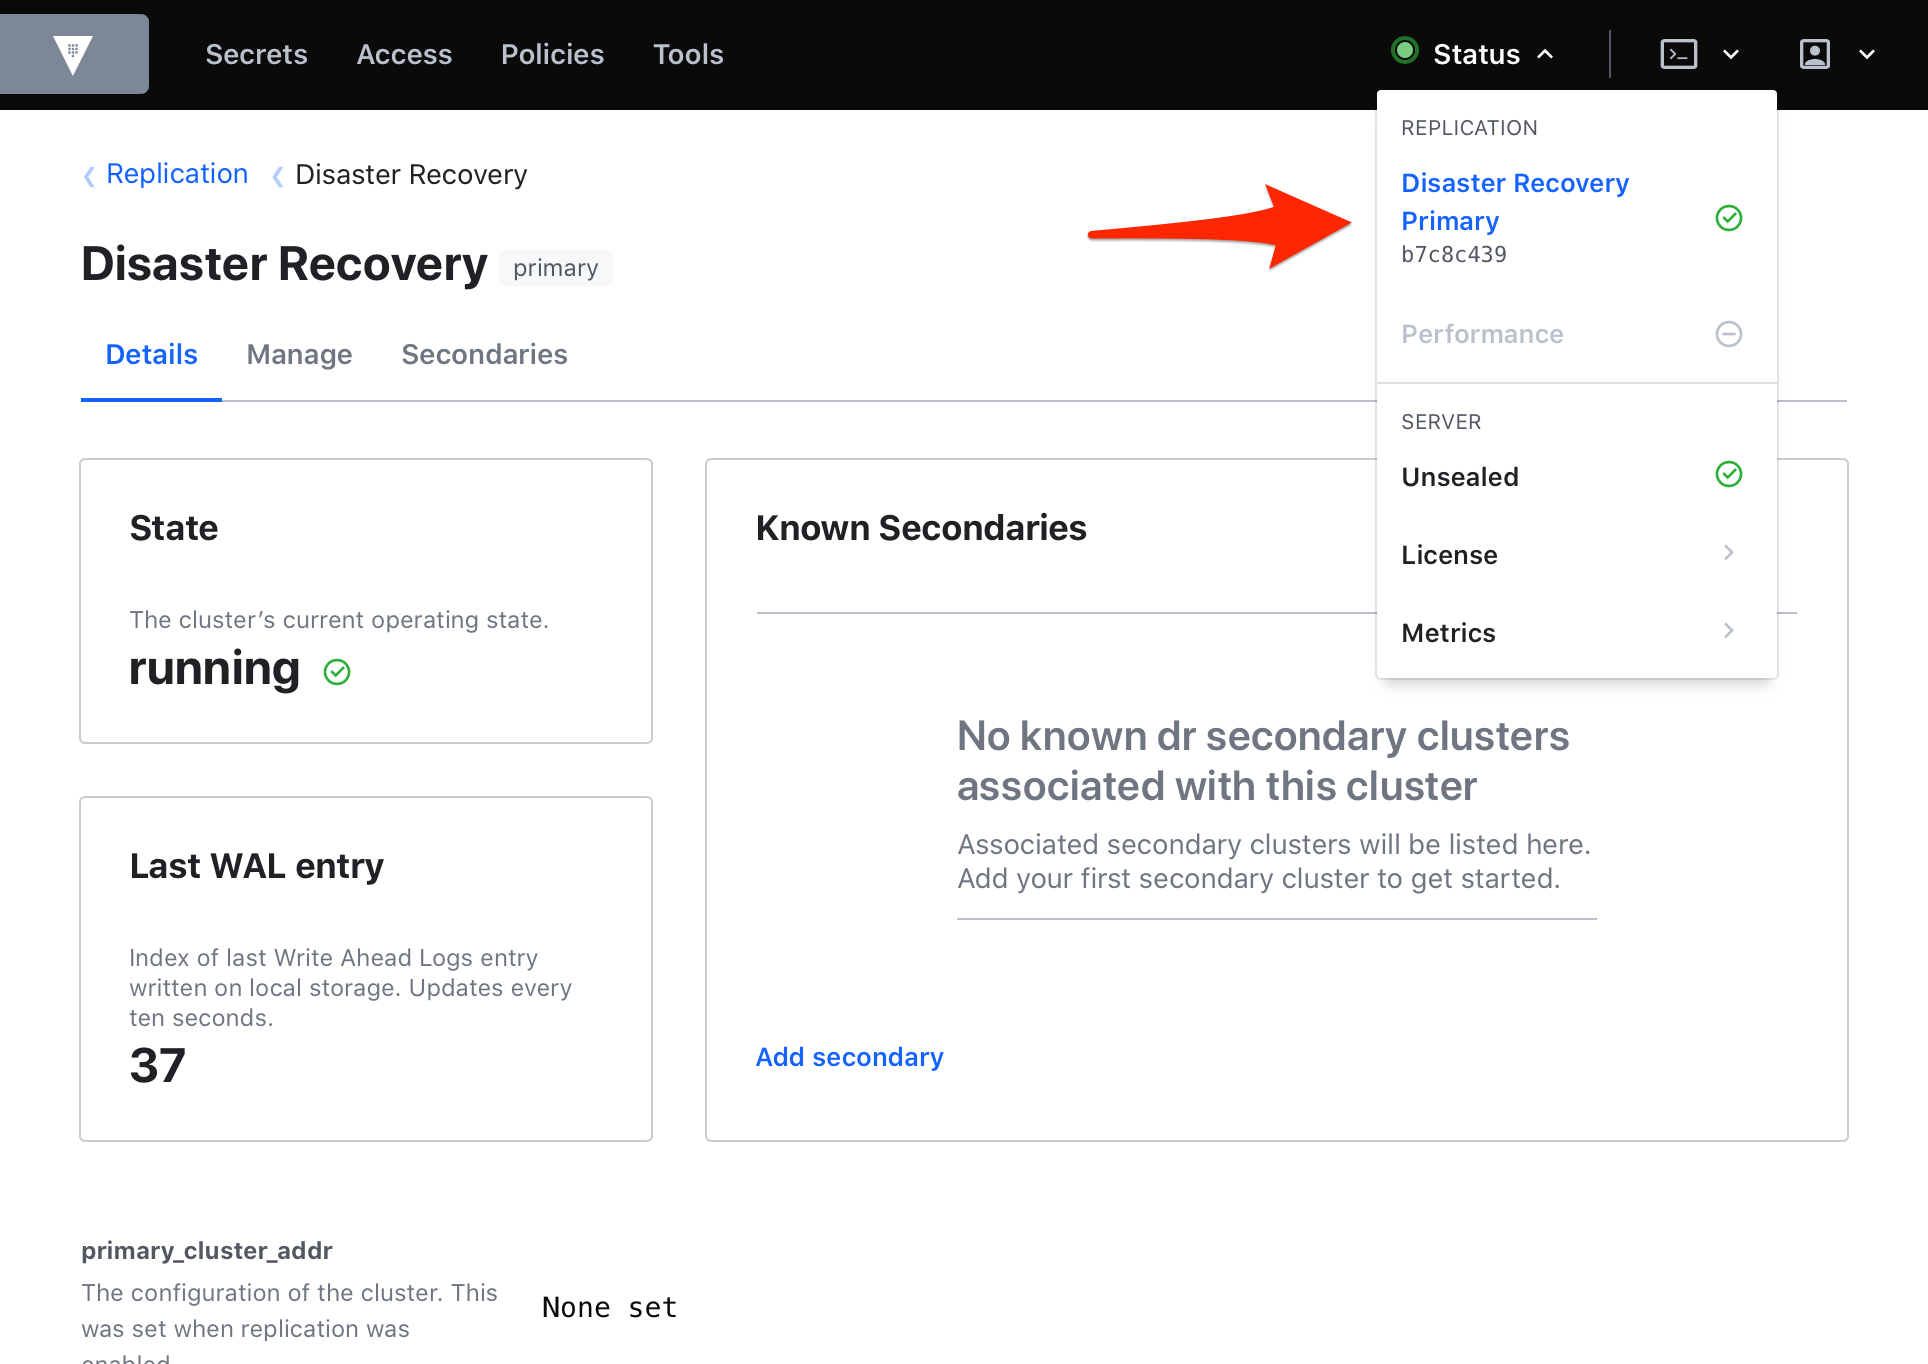 Disaster Recovery primary being selected in the dropdown